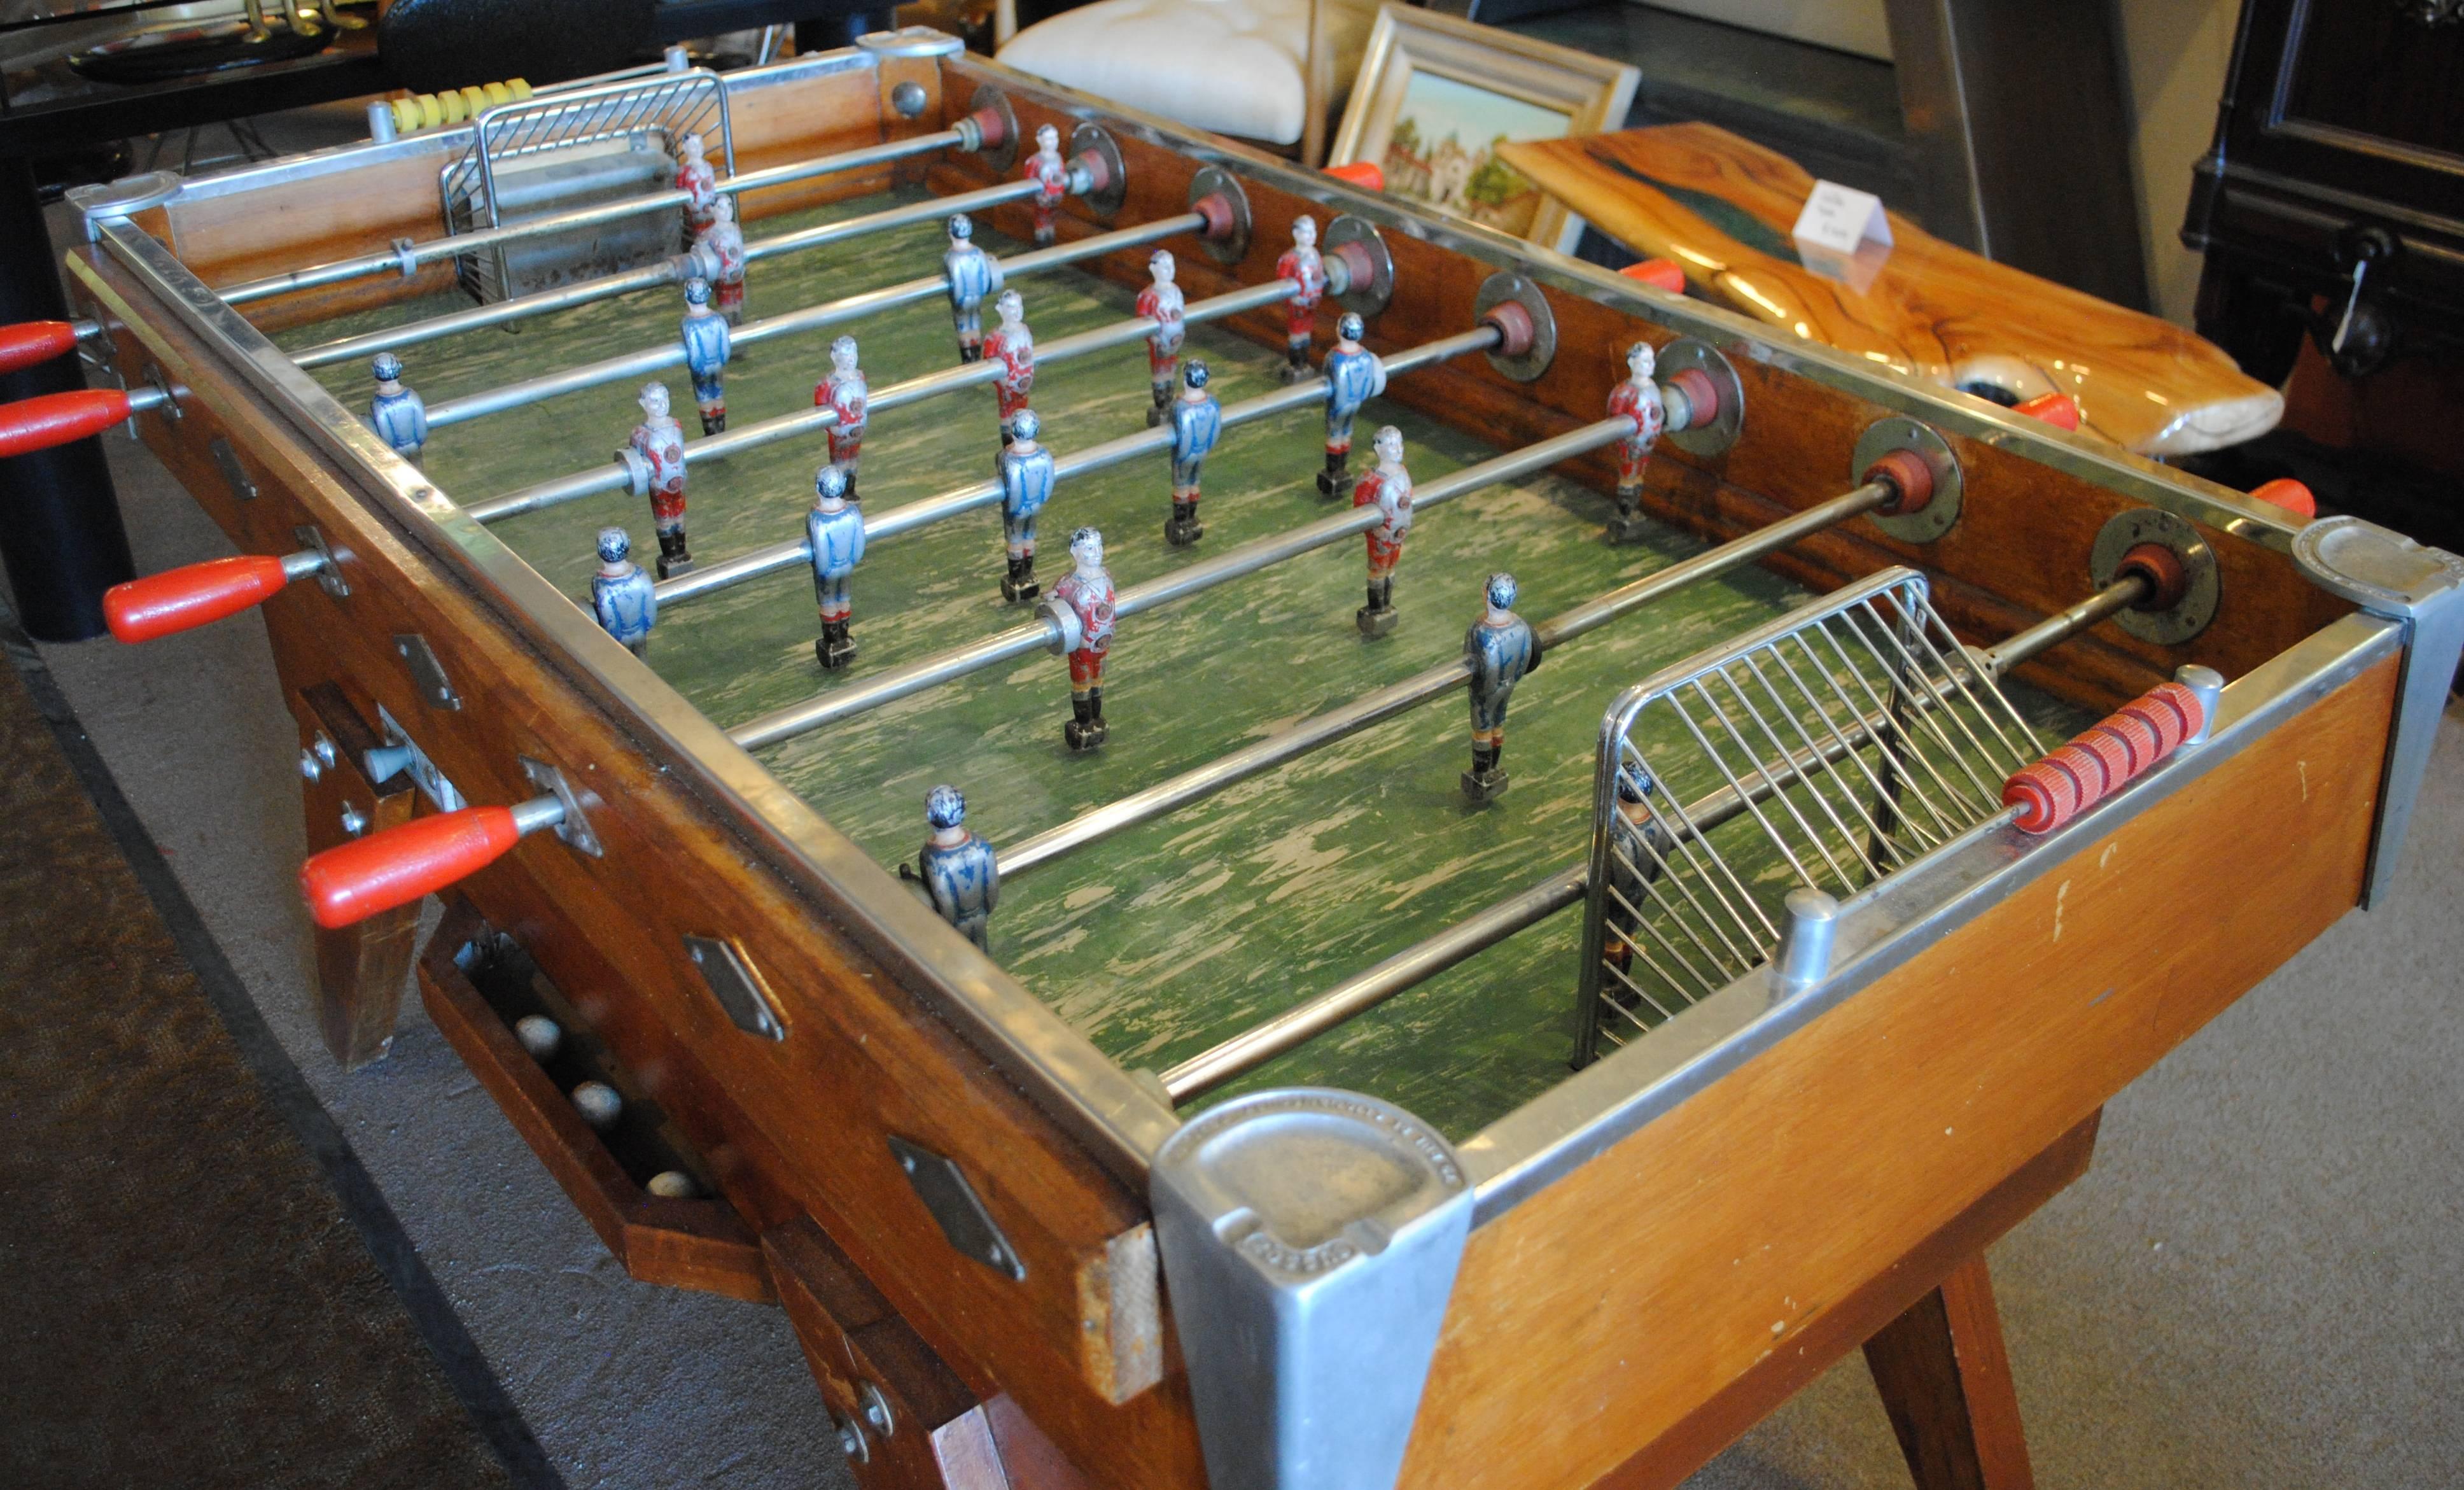 Vintage French foosball table by Bussoz. All players are solid cast metal, with original paint. The cabinet is all solid wood, displaying an honest patina of time. The corner supports are actually cast aluminium ashtrays, with the makers name and